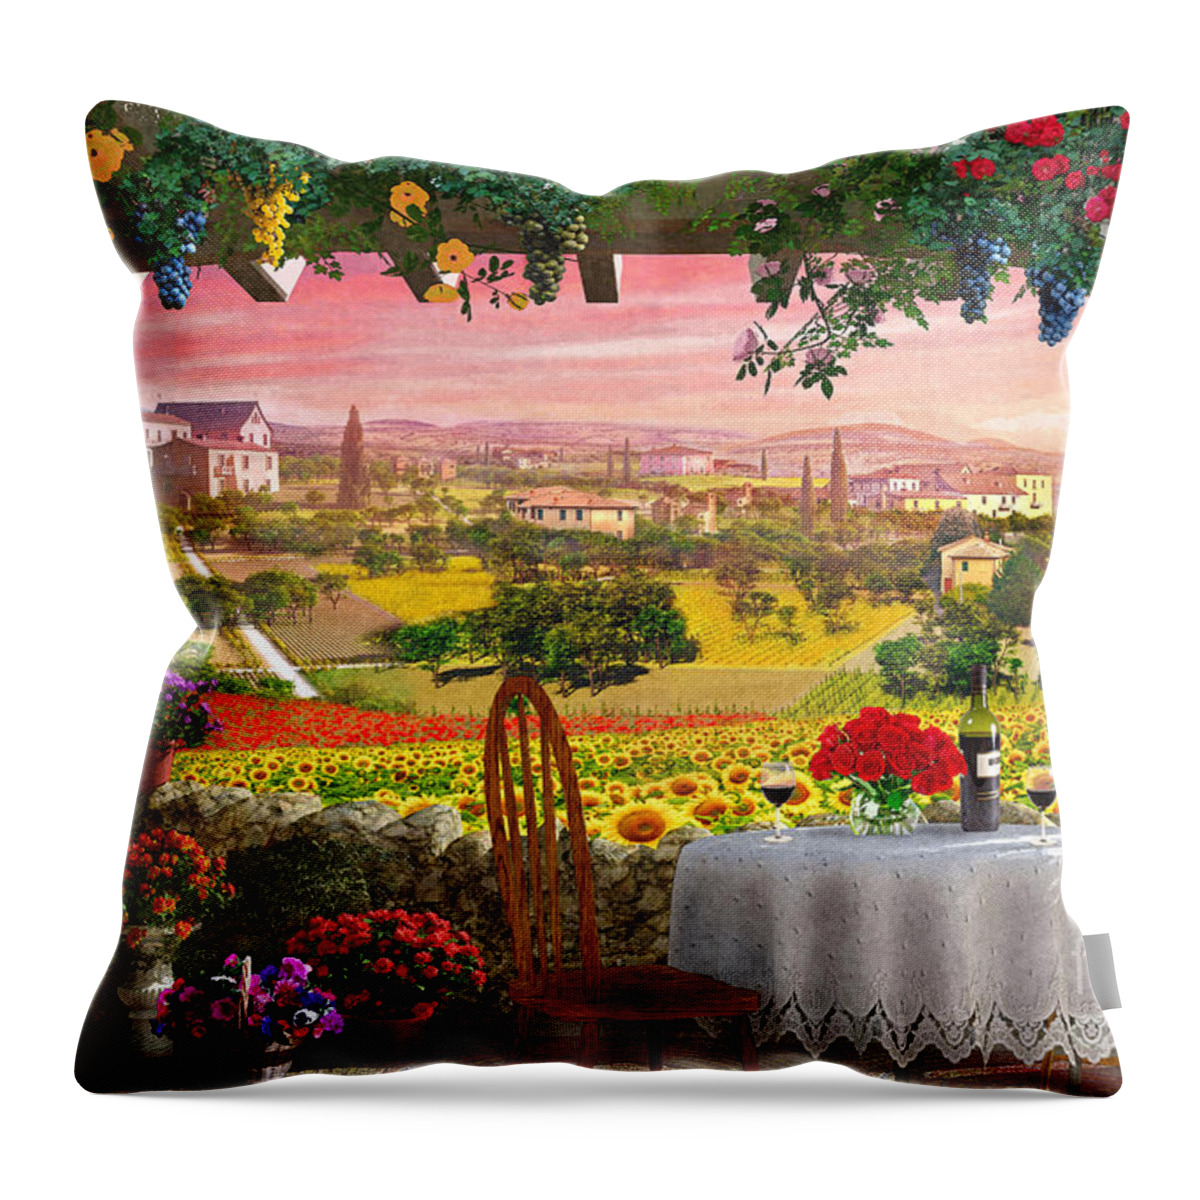 Italy Throw Pillow featuring the digital art Tuscany Hills by MGL Meiklejohn Graphics Licensing